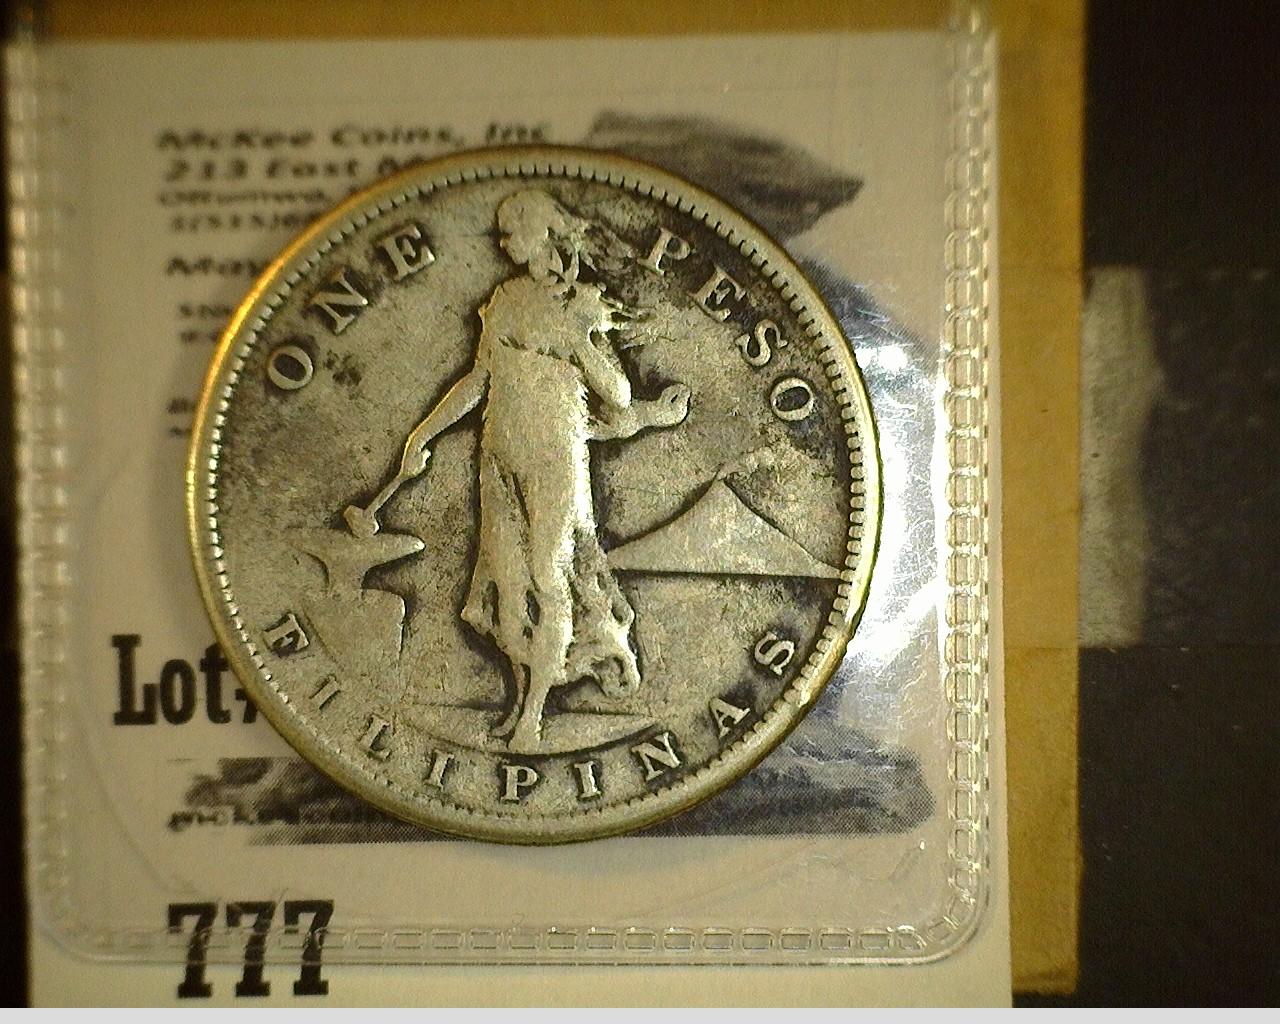 1908 S Philippines Silver Peso, similar to ones dumped by the U.S.A. in the bay of Luzon during Worl